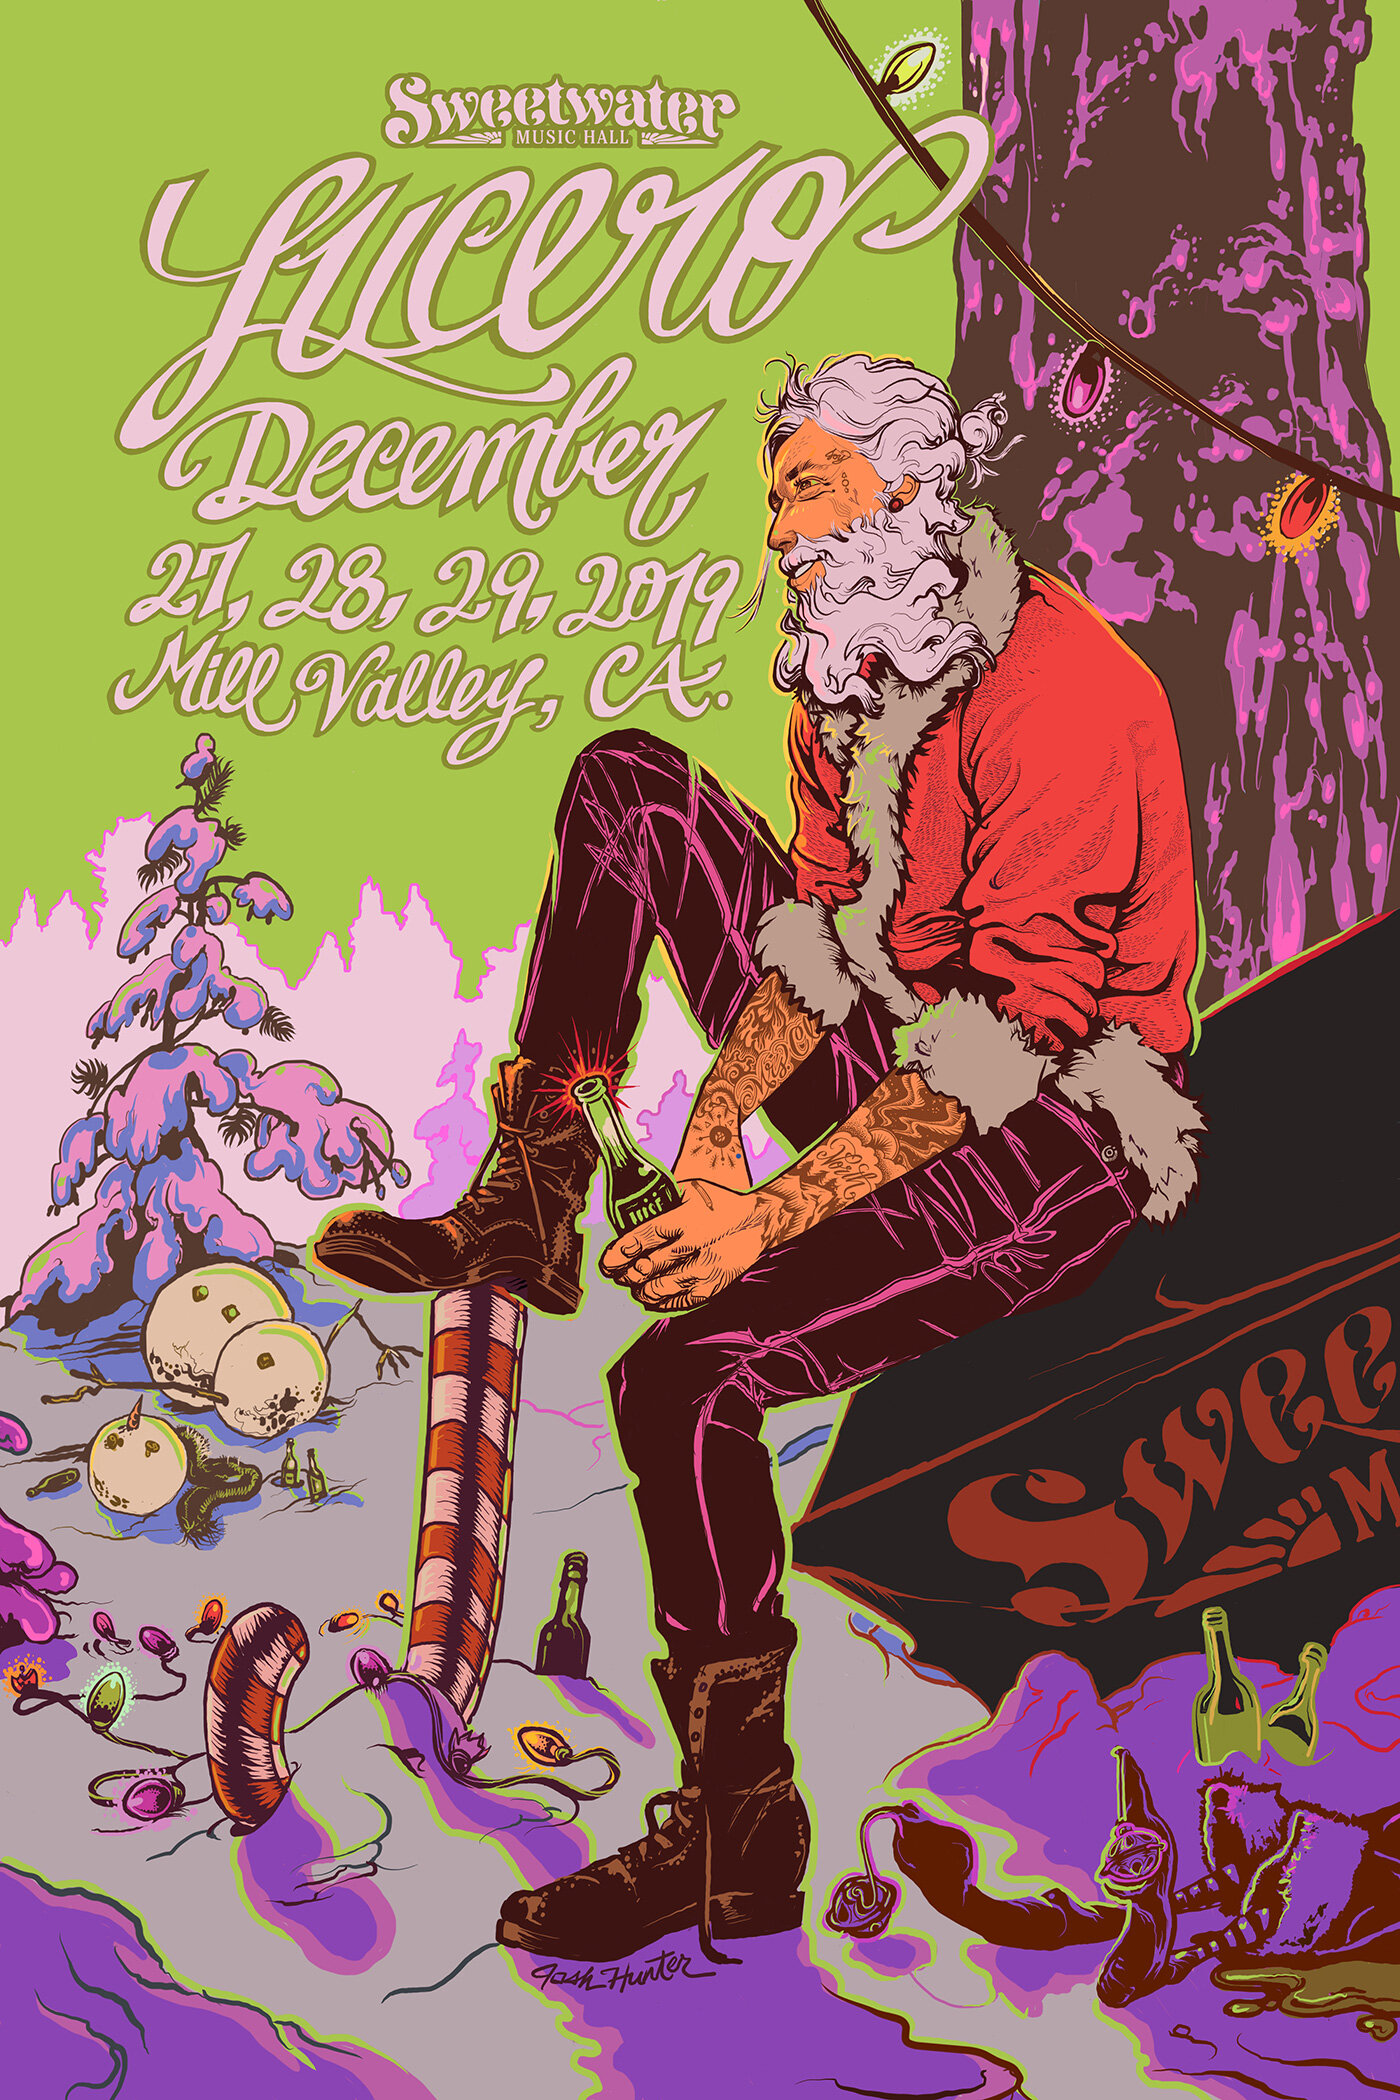 lucero-sweetwater-music-hall-concert-poster.jpg